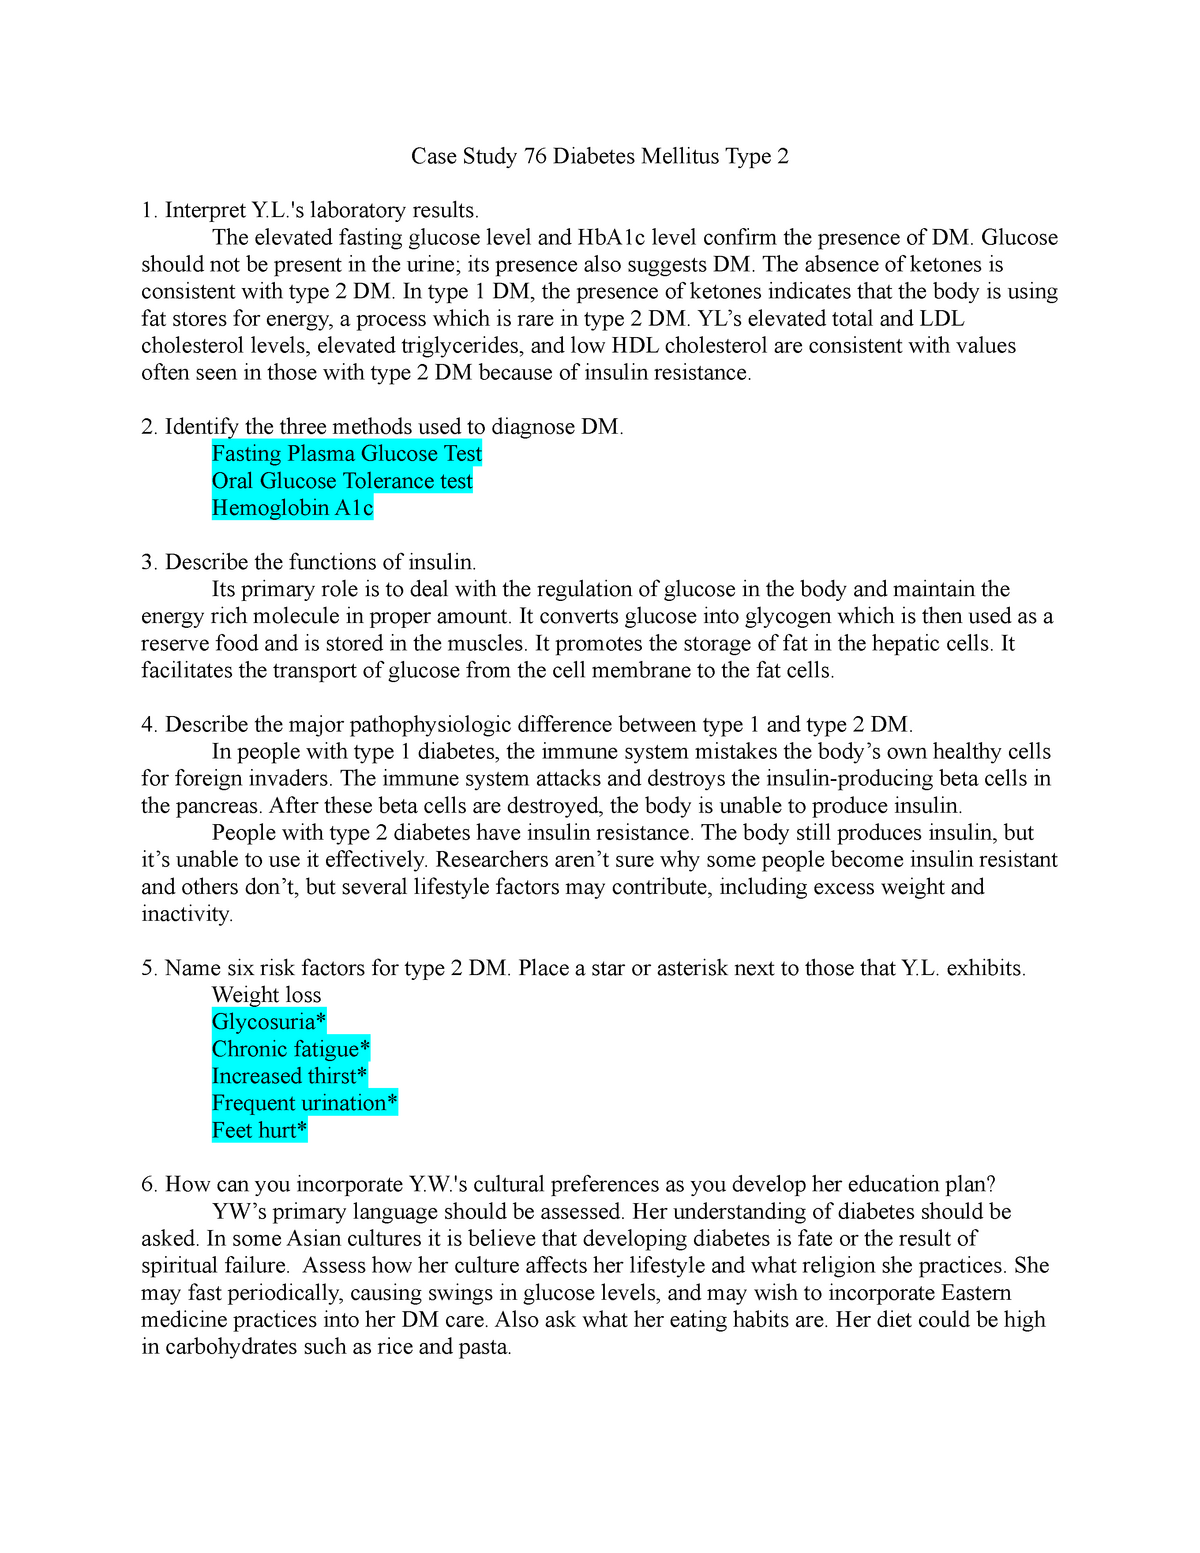 diabetes case study questions and answers pdf